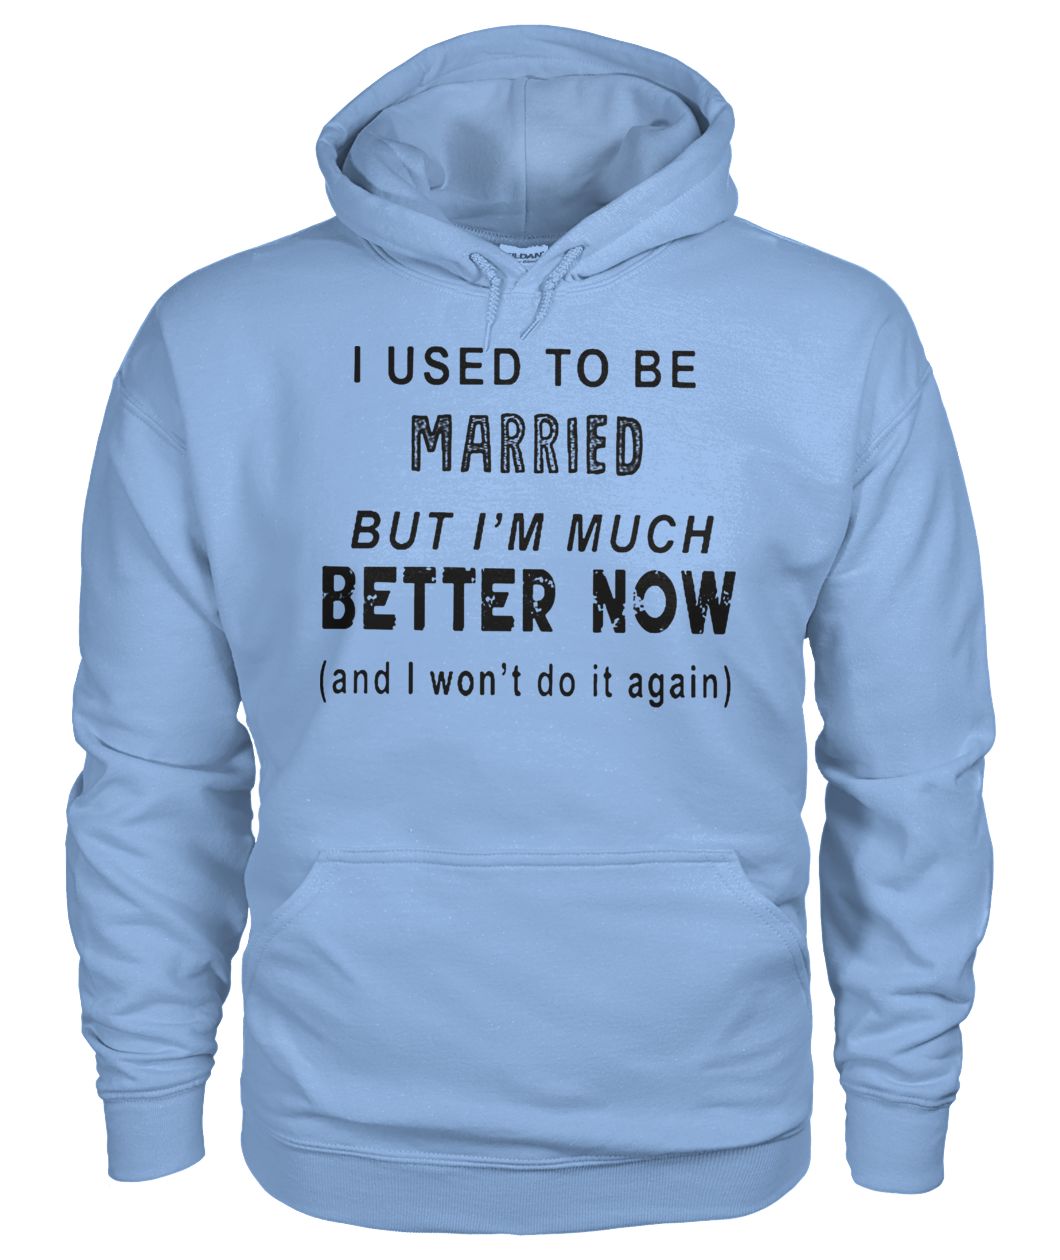 I used to be married but I'm much better now gildan hoodie